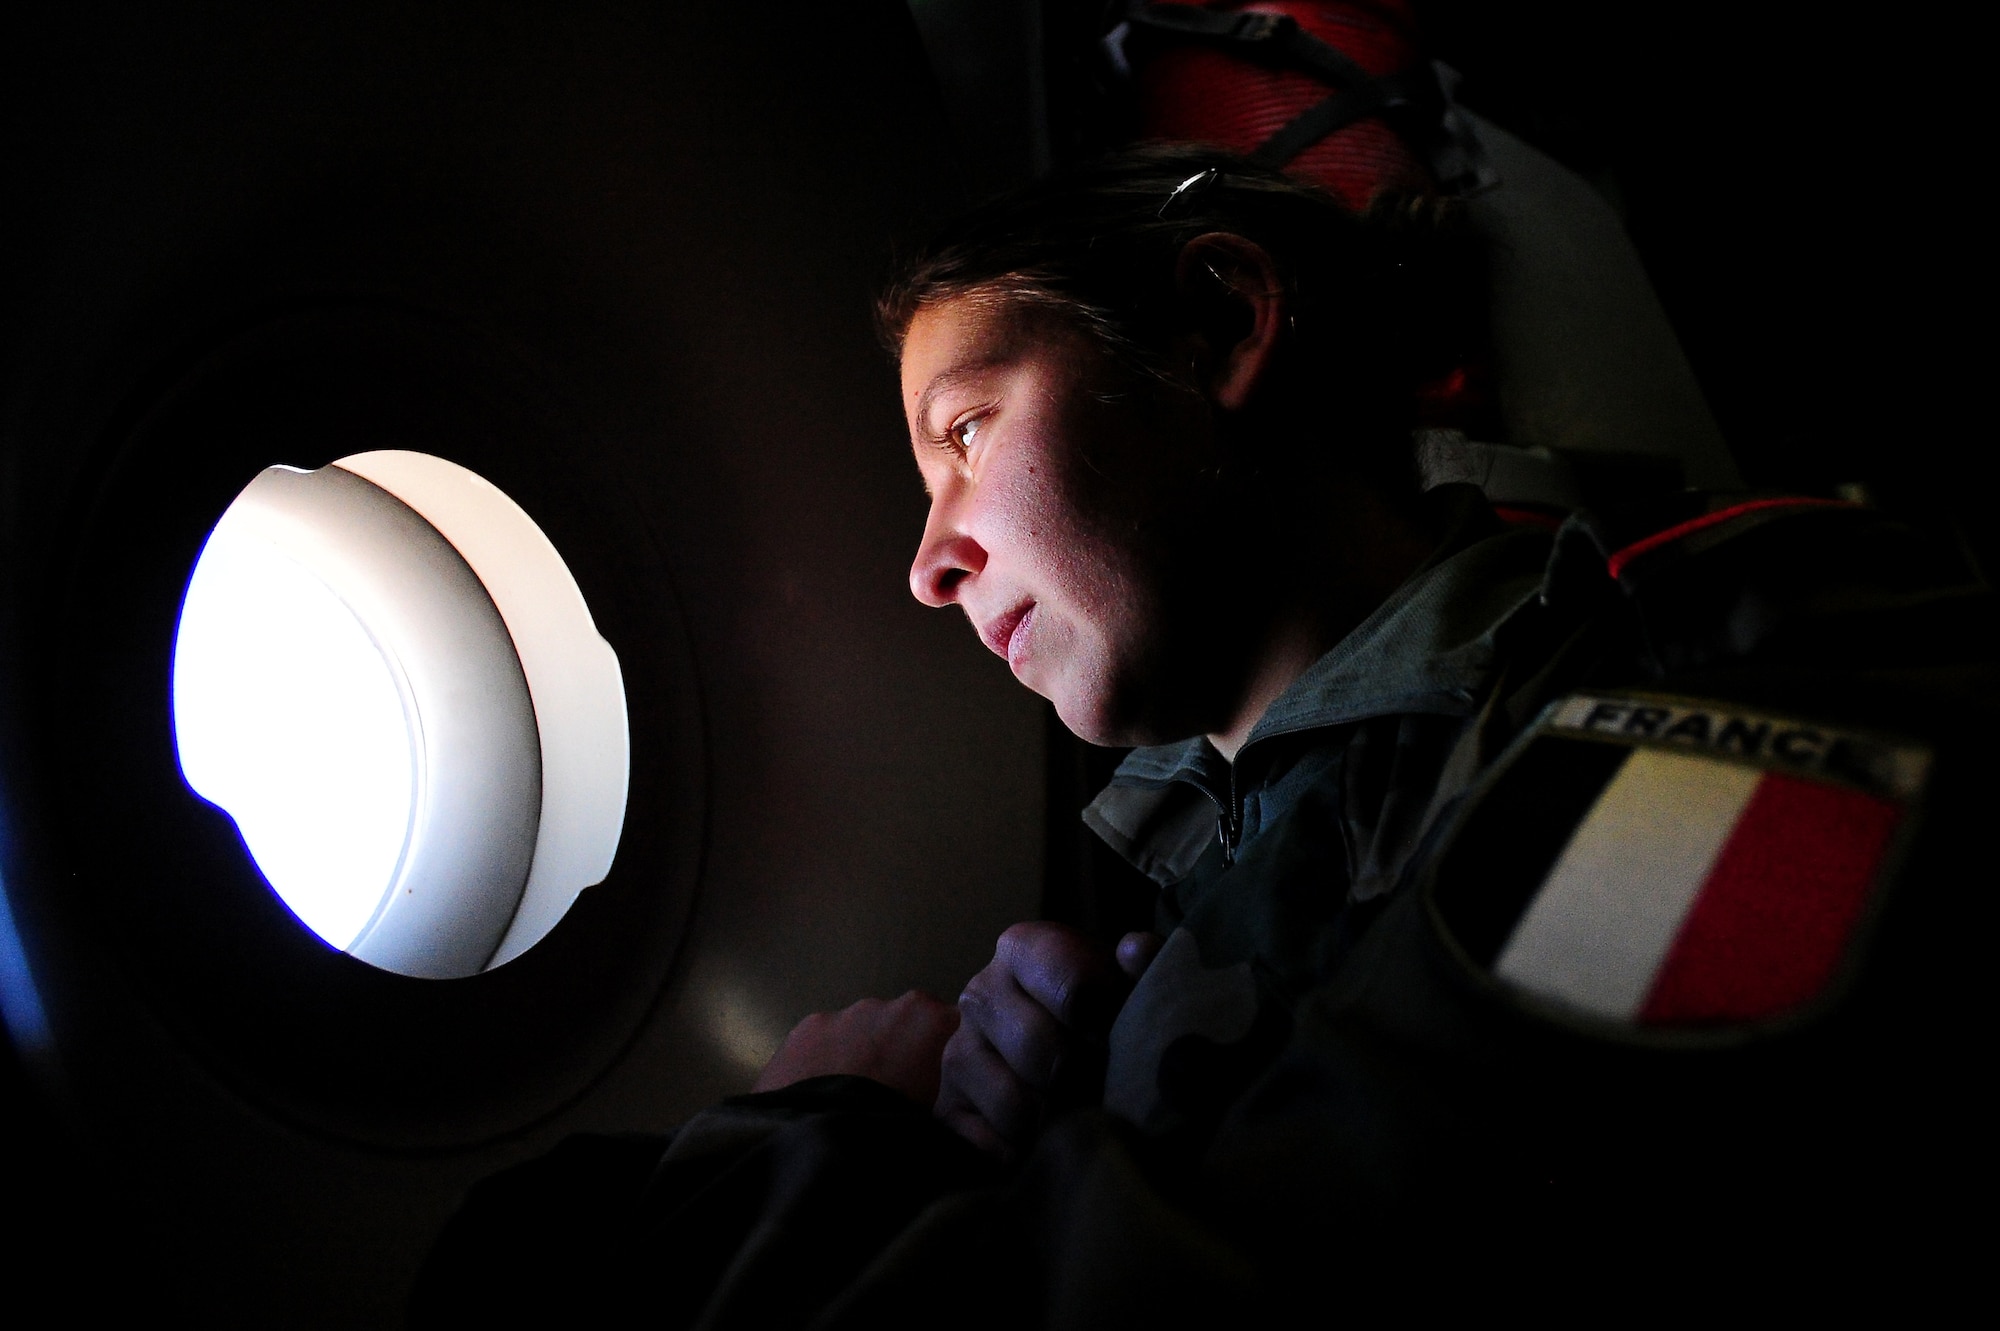 WESTERN EUROPE - French soldier, Marjorie Moreaux, looks out of a window while in route to Mali in a U.S. Air Force C-17 Globemaster III. The United States has agreed to help France airlift troops and equipment into Mali. (U.S. Air Force photo by Senior Airman James Richardson/Released)